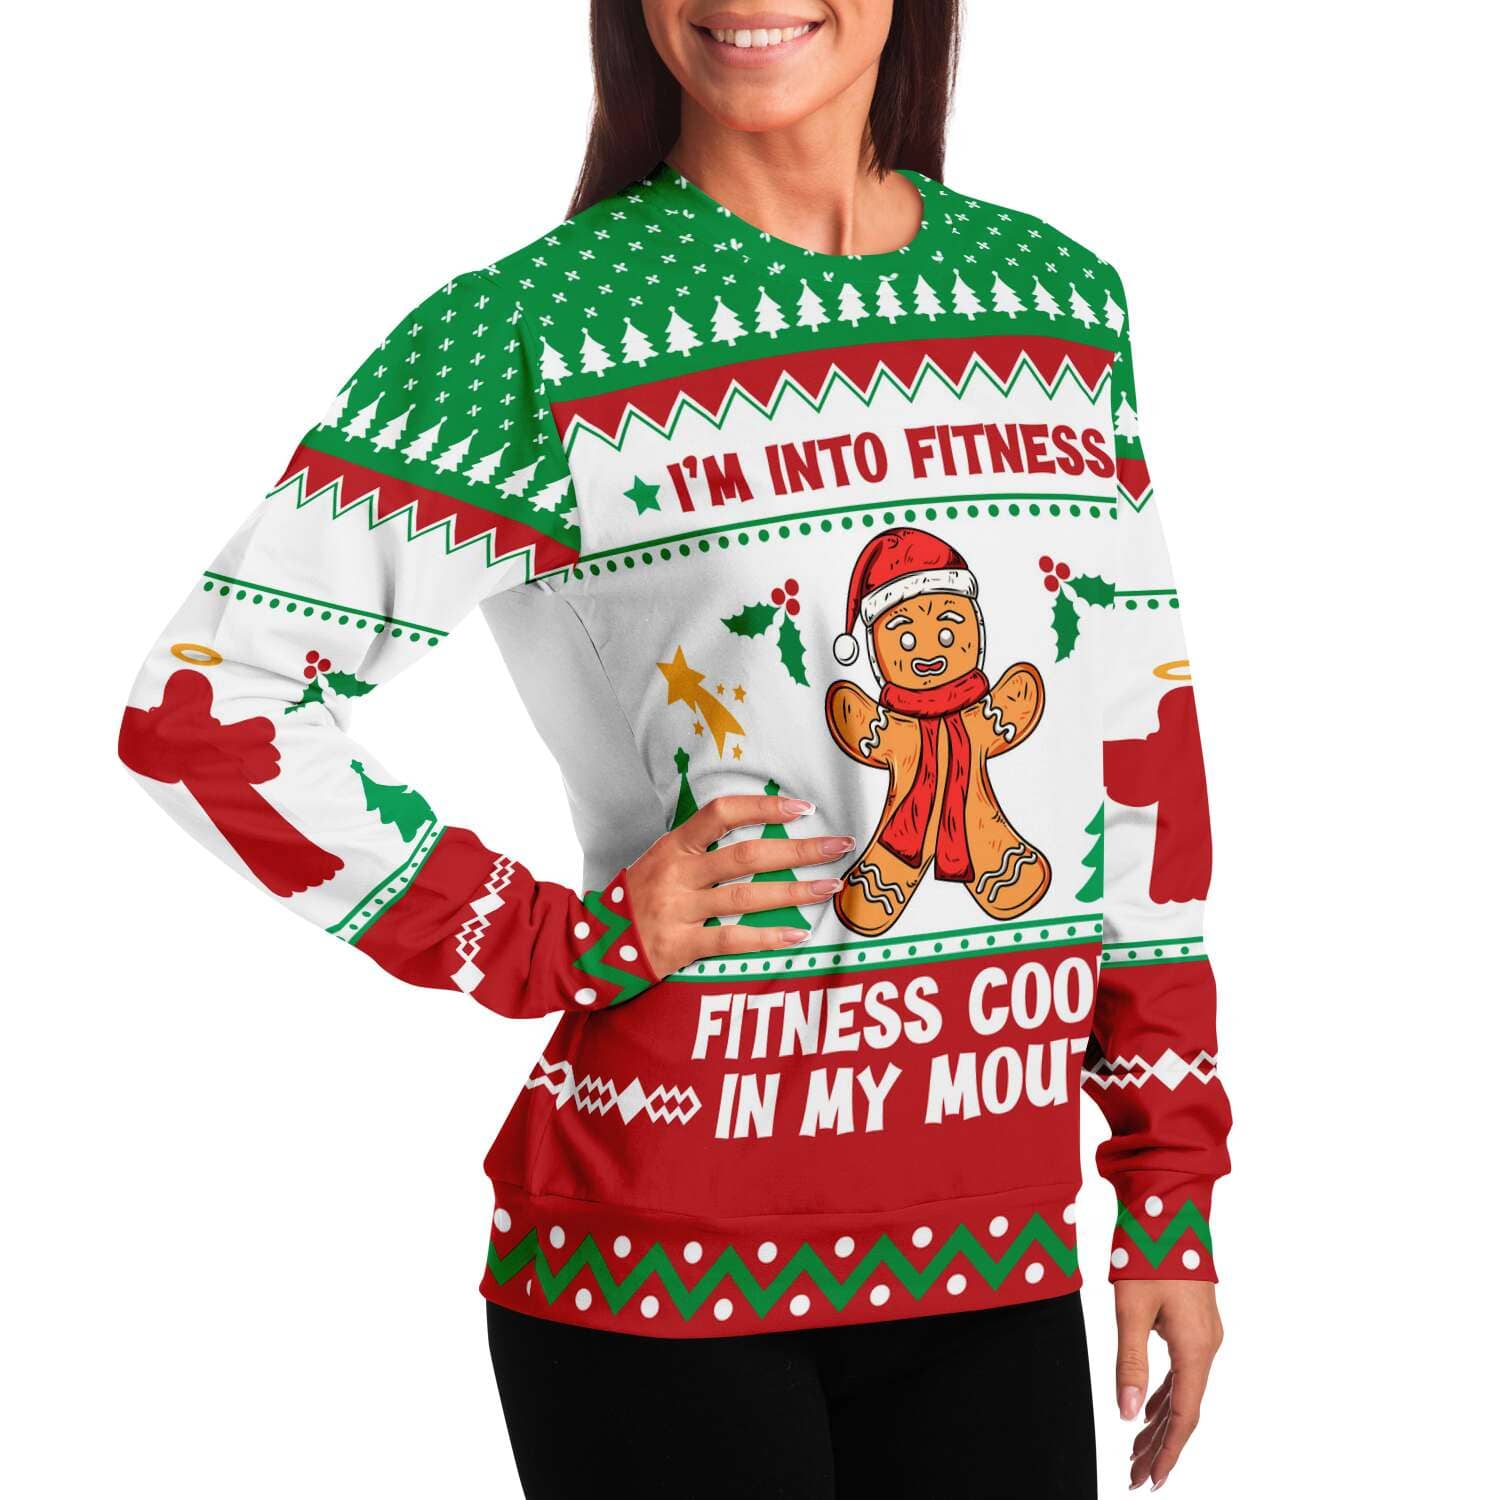 I'm into Fitness Cookie in My Mouth - Funny Workout Gym Ugly Christmas Sweater (Sweatshirt)